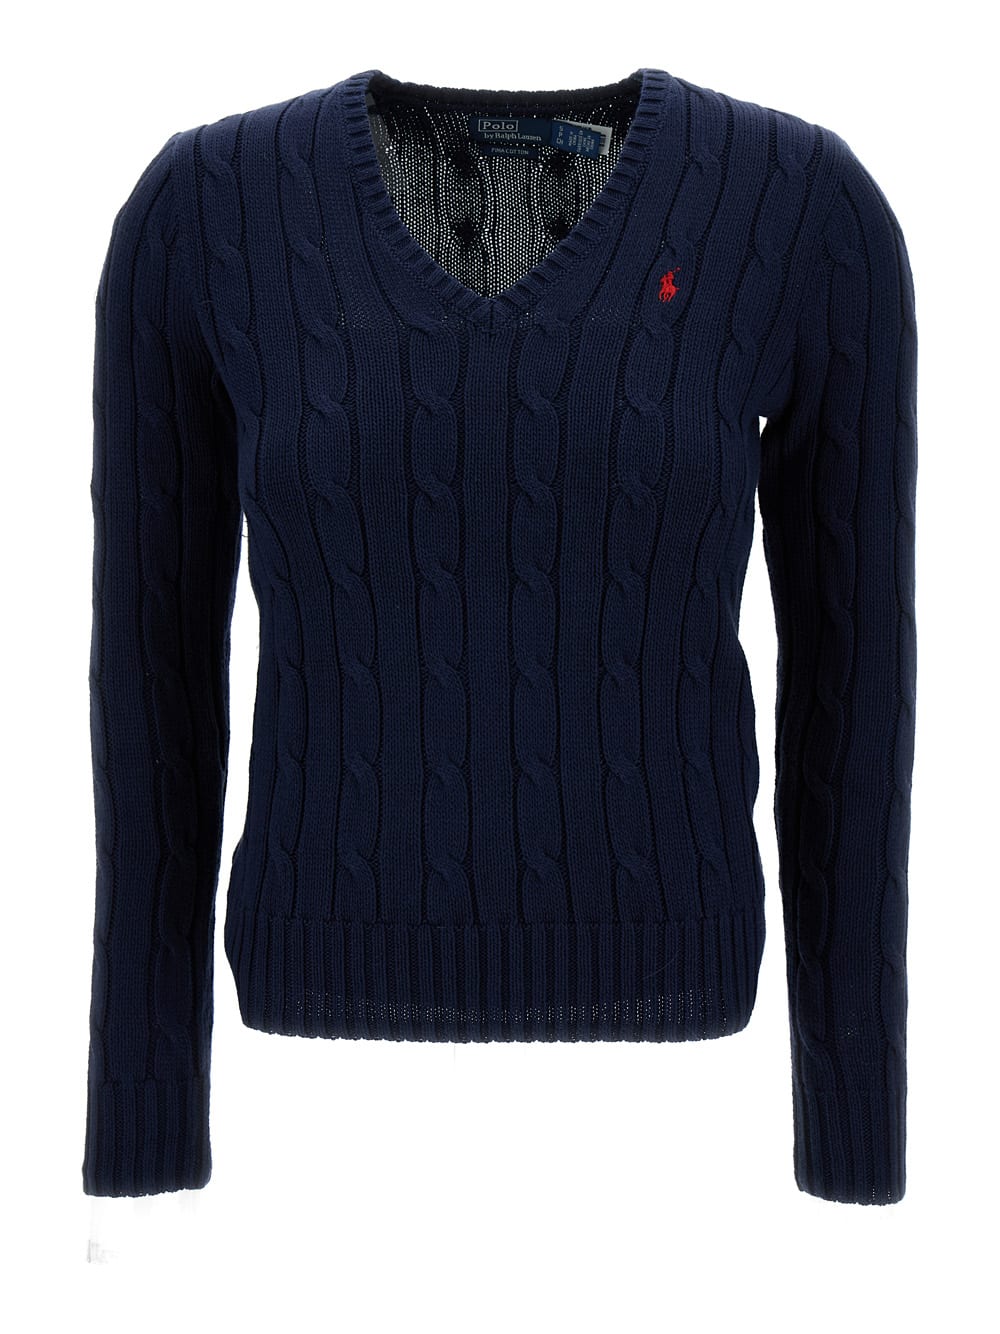 POLO RALPH LAUREN KIMBERLY BLUE CABLE-KNIT PULLOVER WITH PONY EMBROIDERY IN COTTON WOMAN